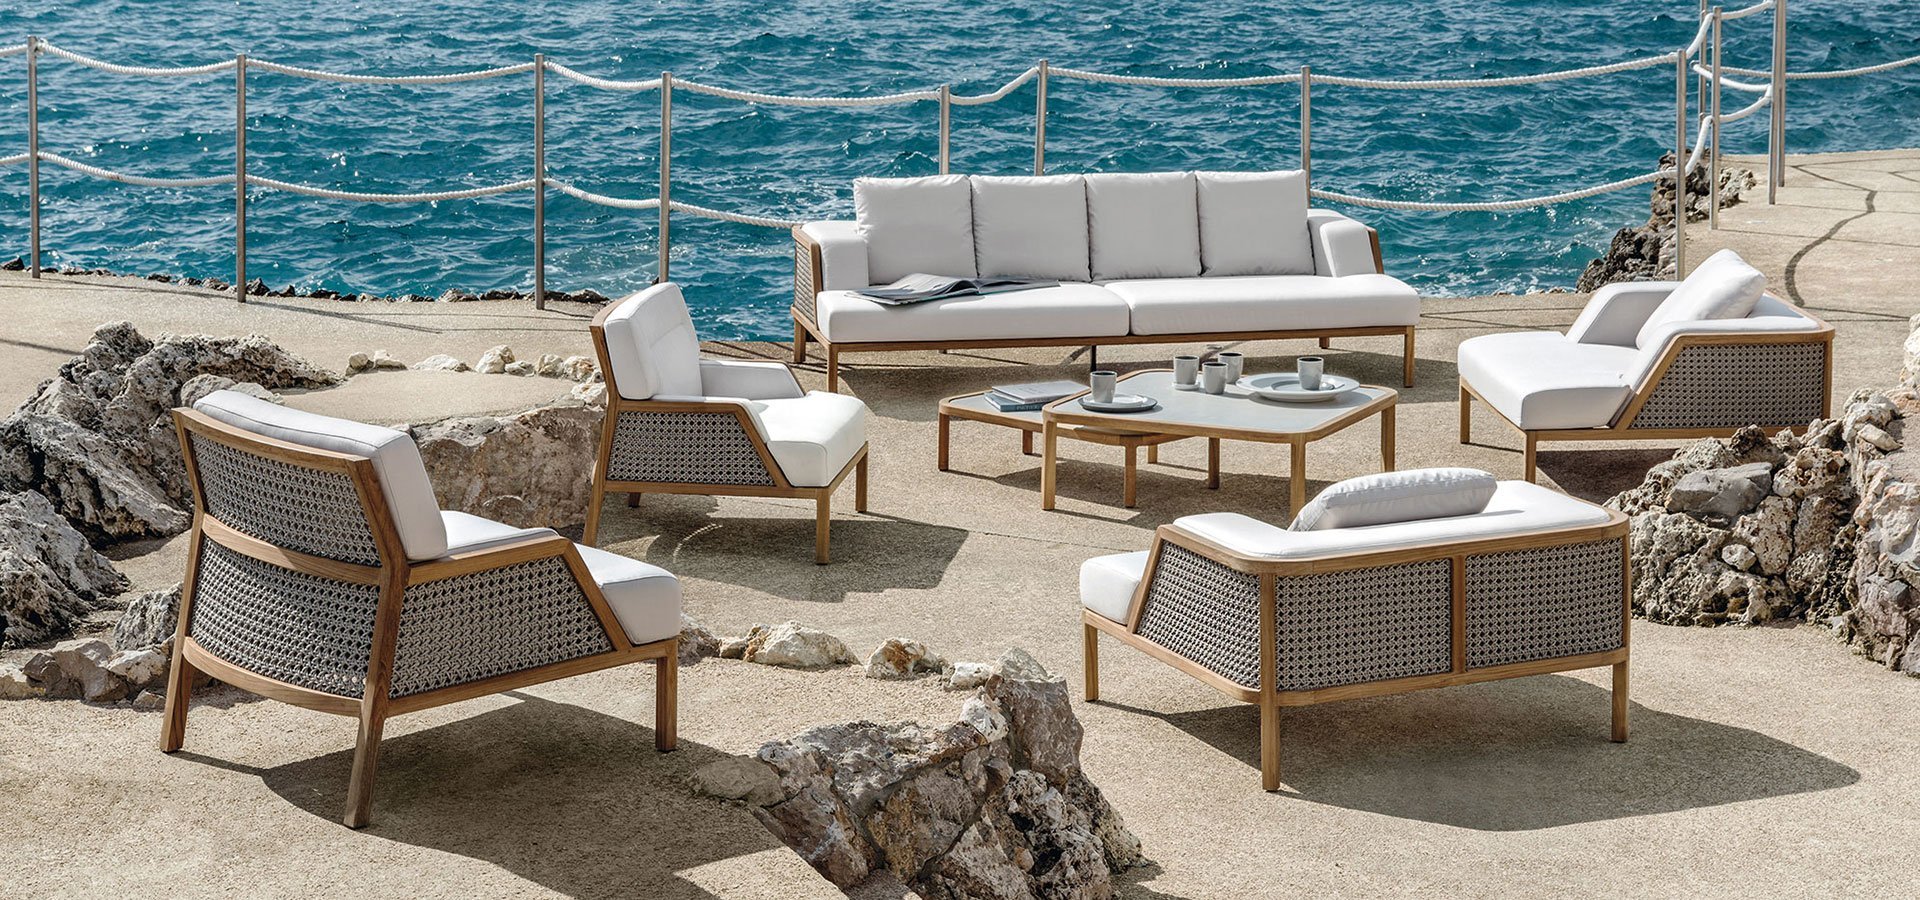 Grand Life Lounge Chair from Ethimo, designed by Christophe Pillet